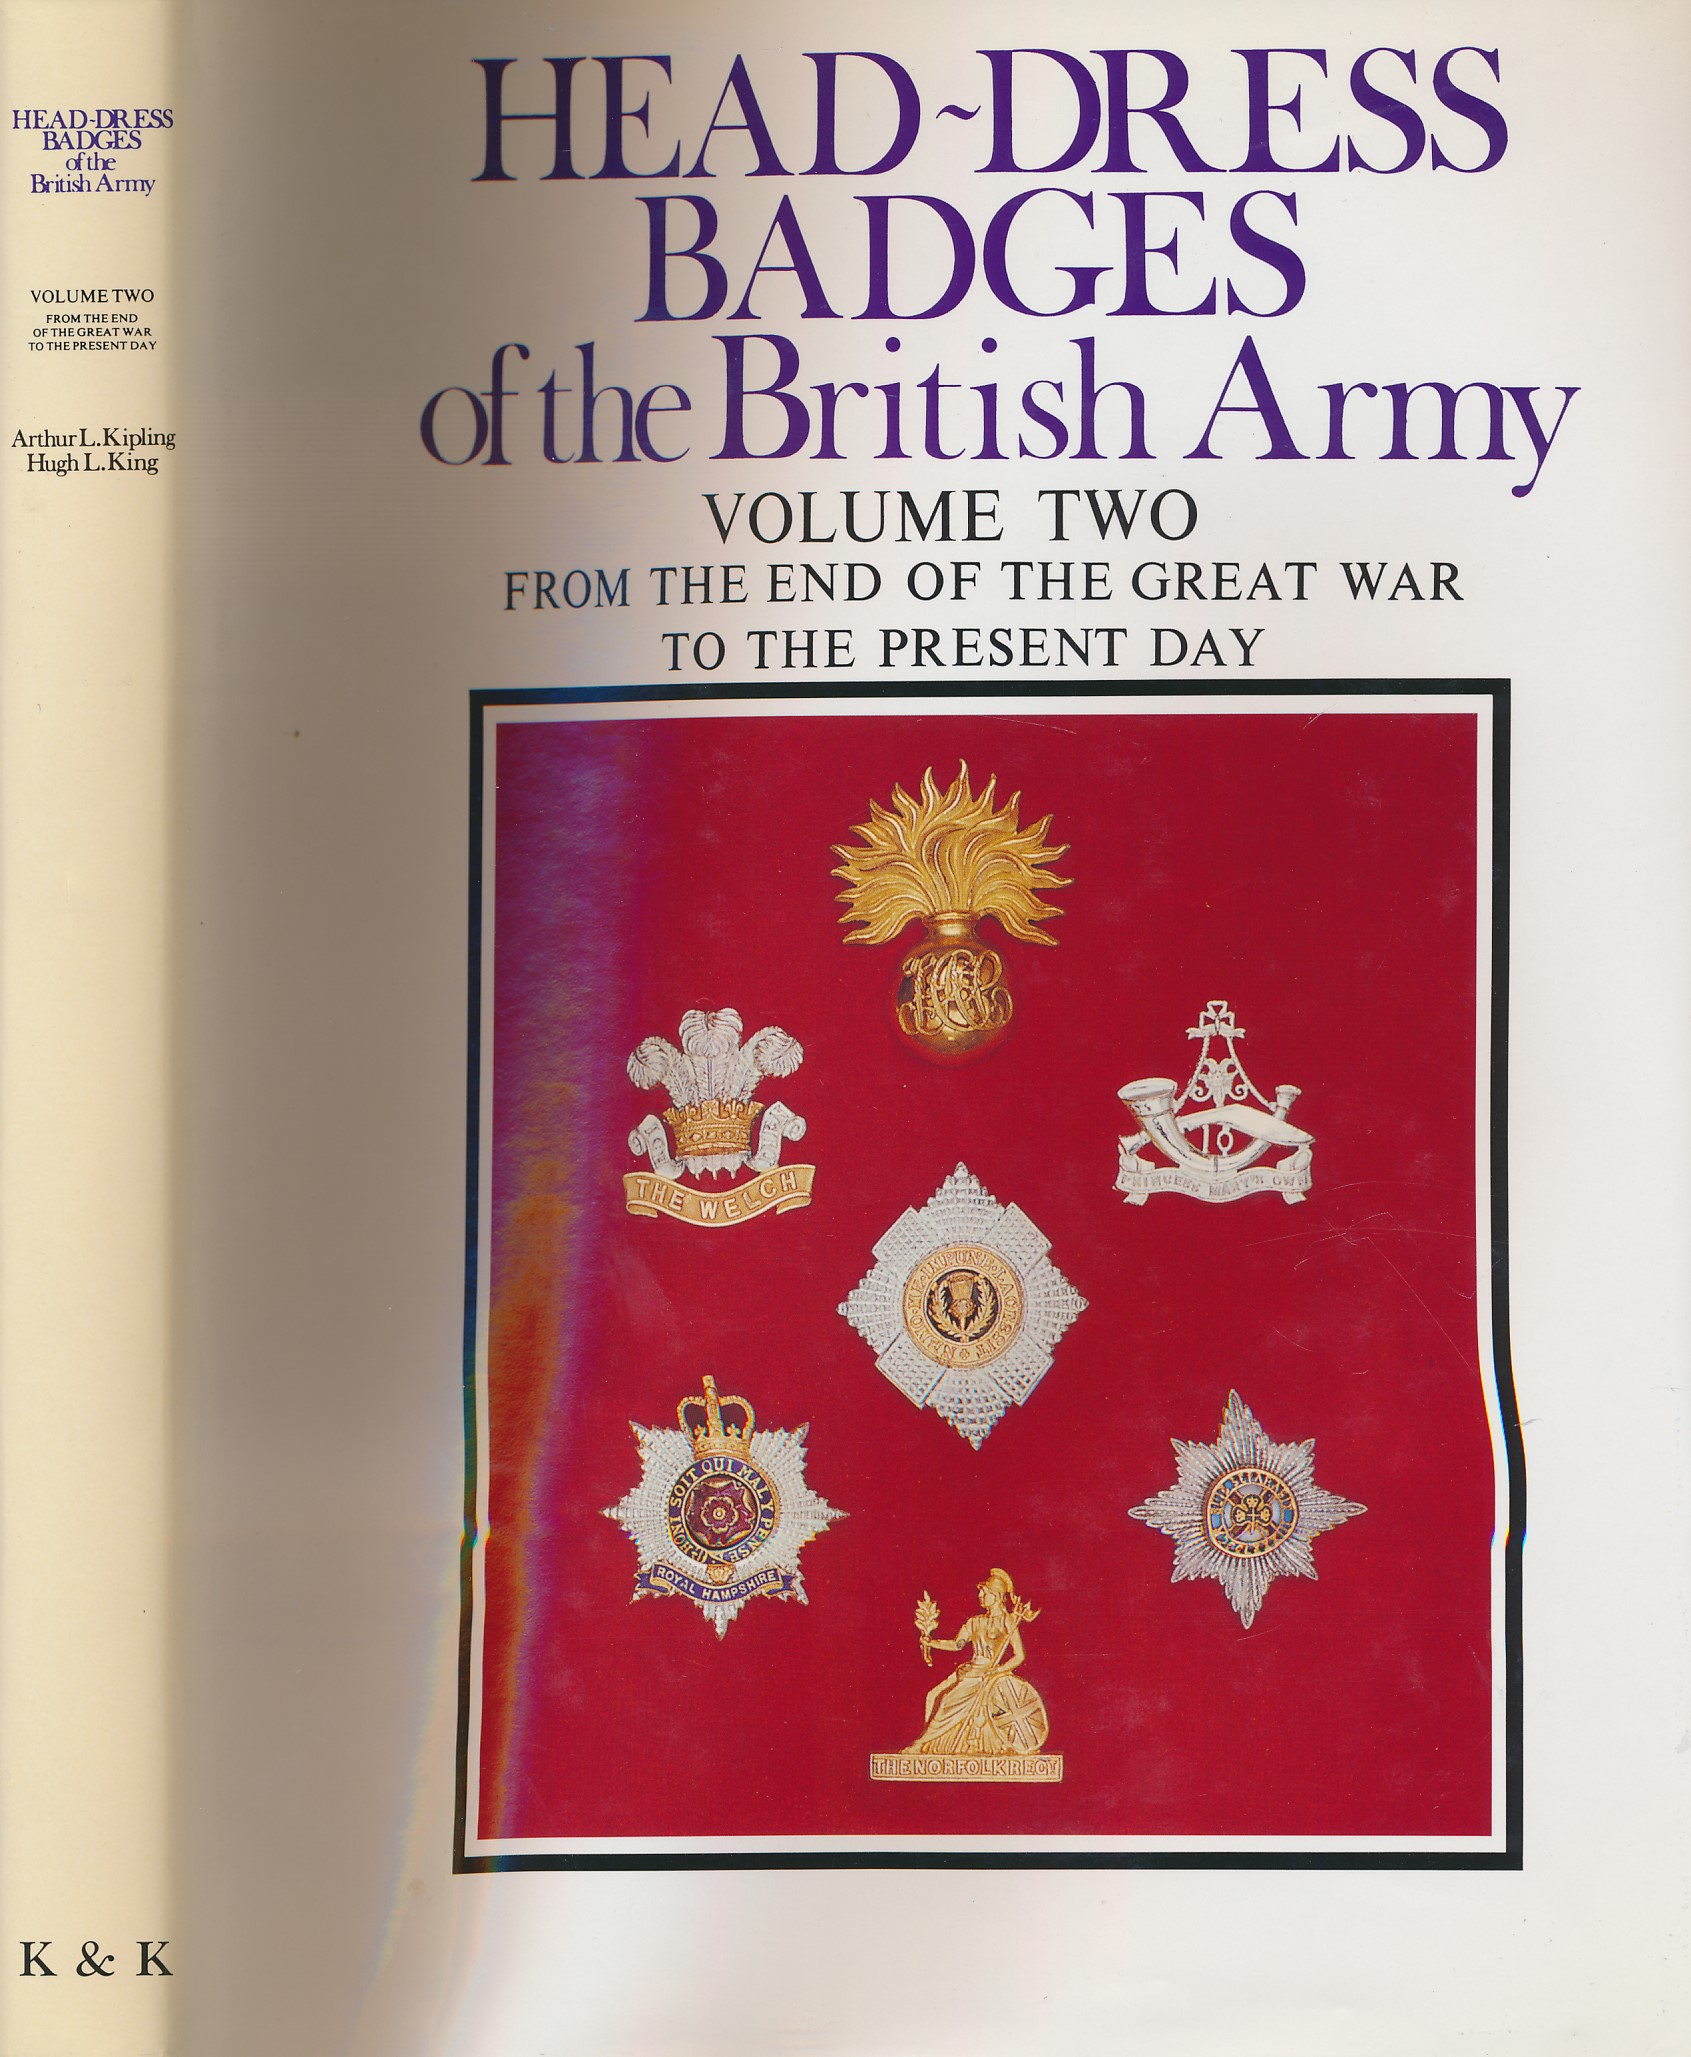 Head-Dress Badges of the British Army. Volume 2: From the End of the Great War to the Present Day. Signed copy.